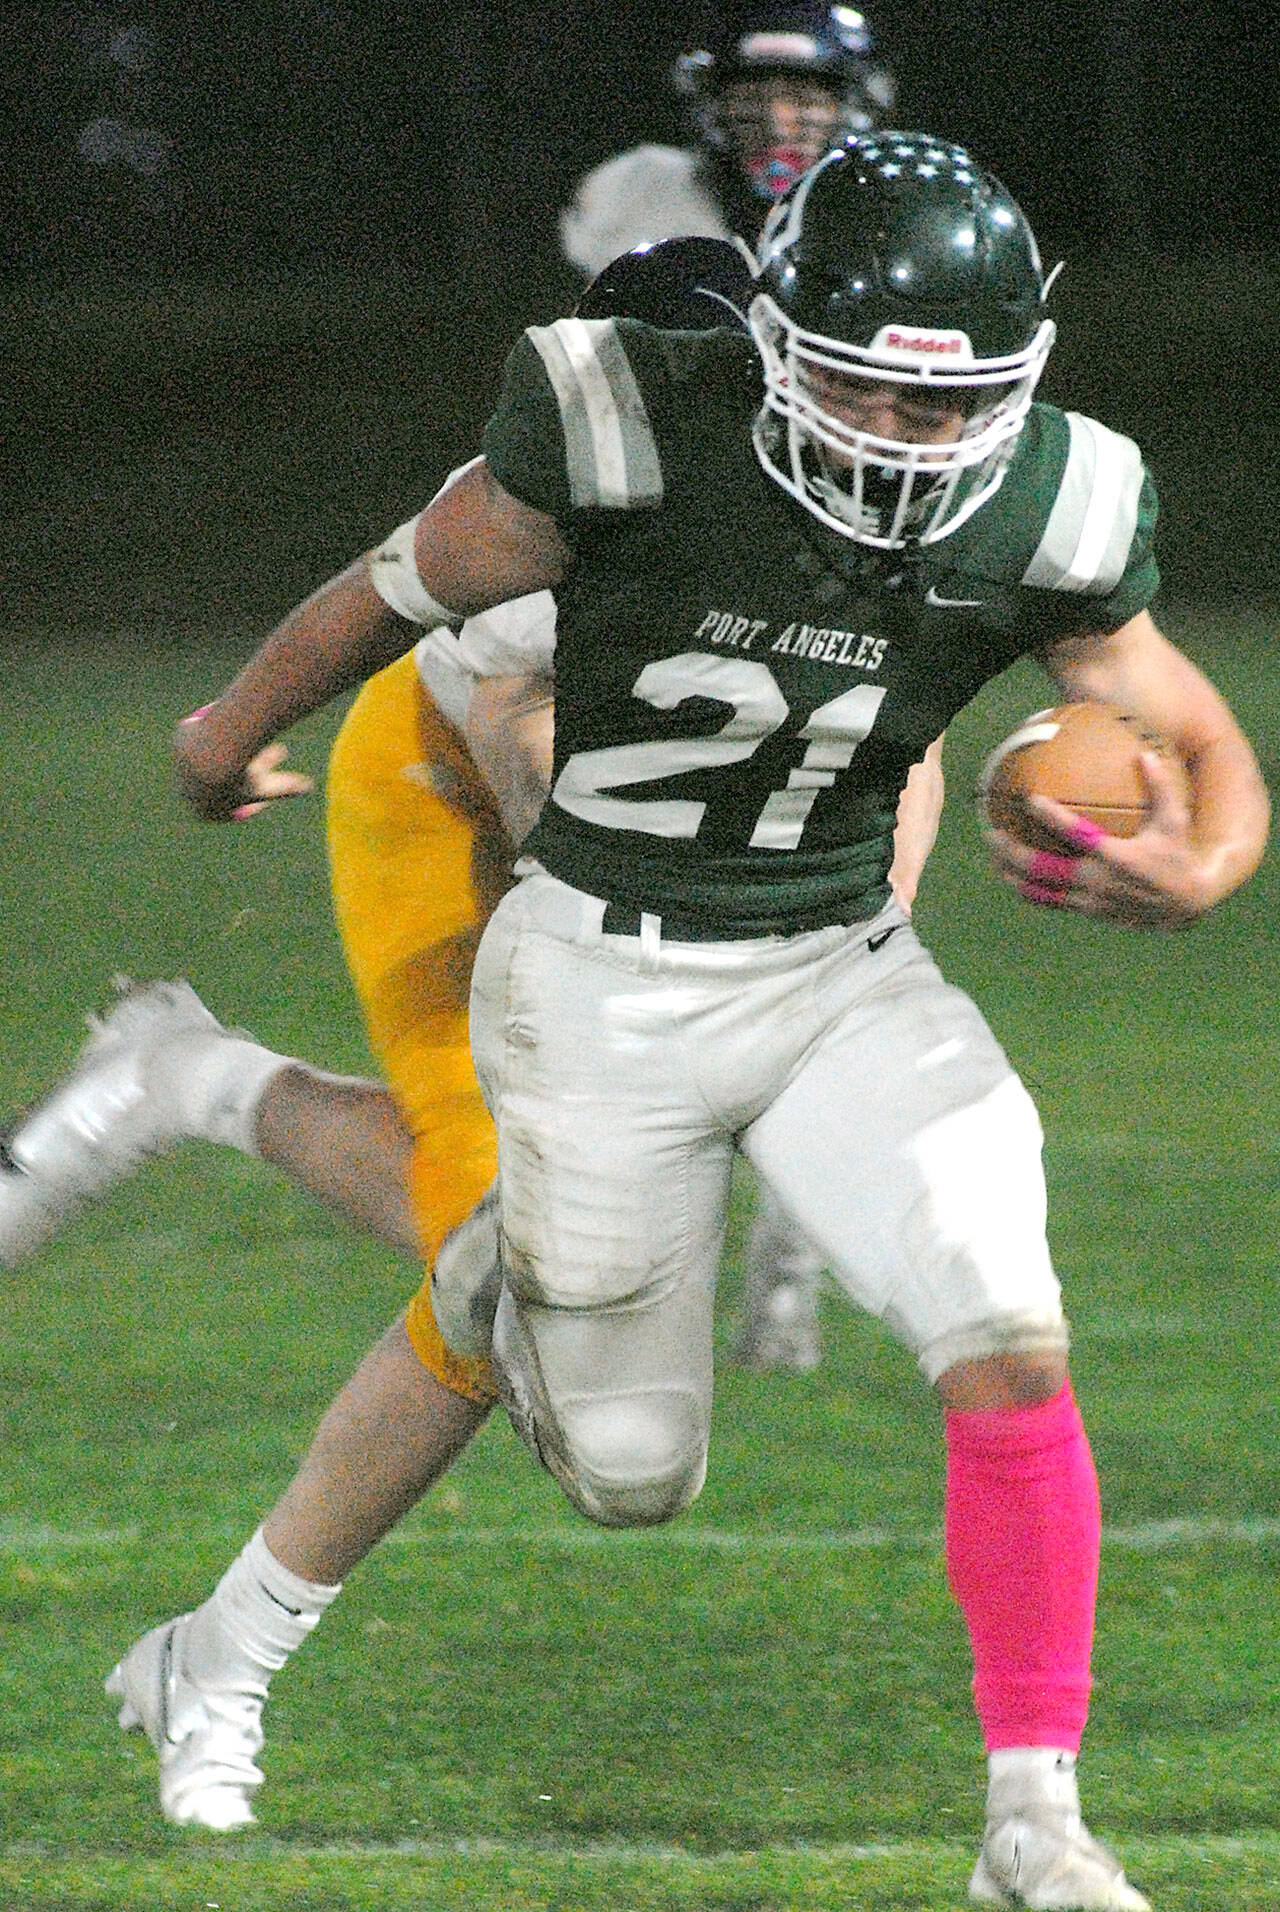 Keith Thorpe/Peninsula Daily News
Port Angeles' Daniel Cable escapes the Bainbridge defense on Friday night at Port Angeles Civic Field.